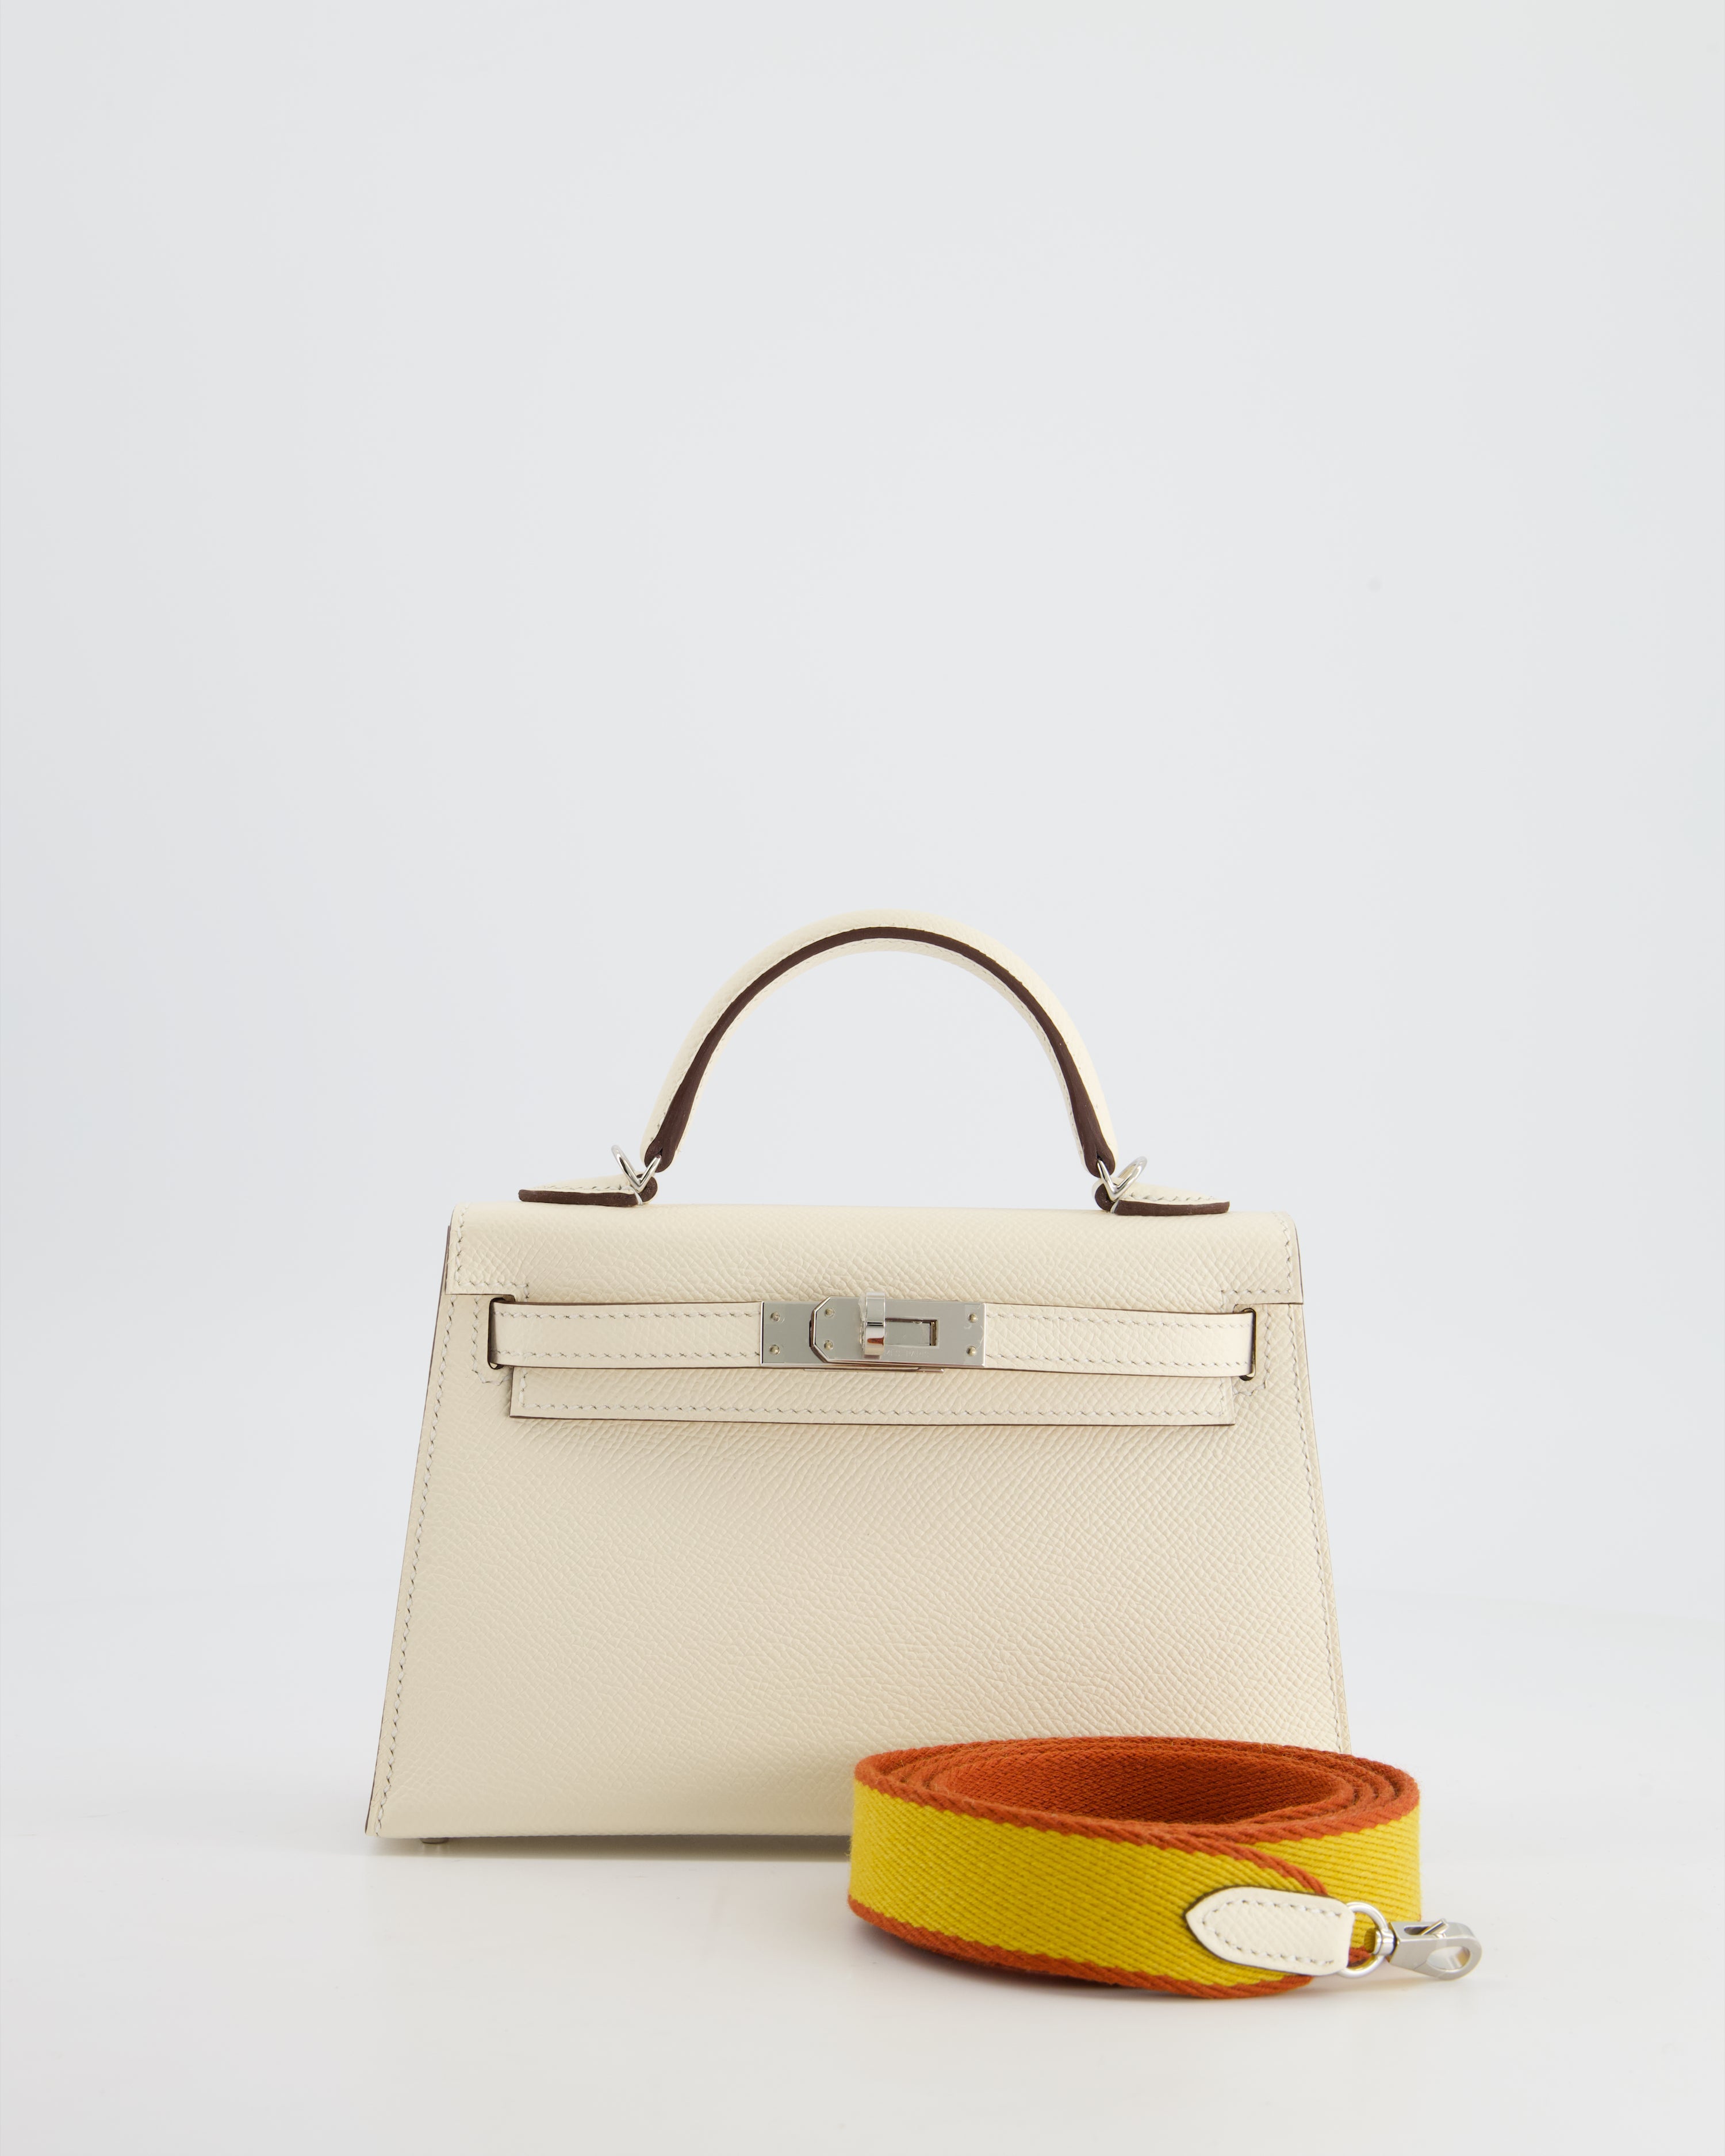 Hermes Mini Kelly Ii Sellier 20cm In Nata Epsom Leather With Palladium Hardware & Fabric Strap In Jaune & A In Neutral